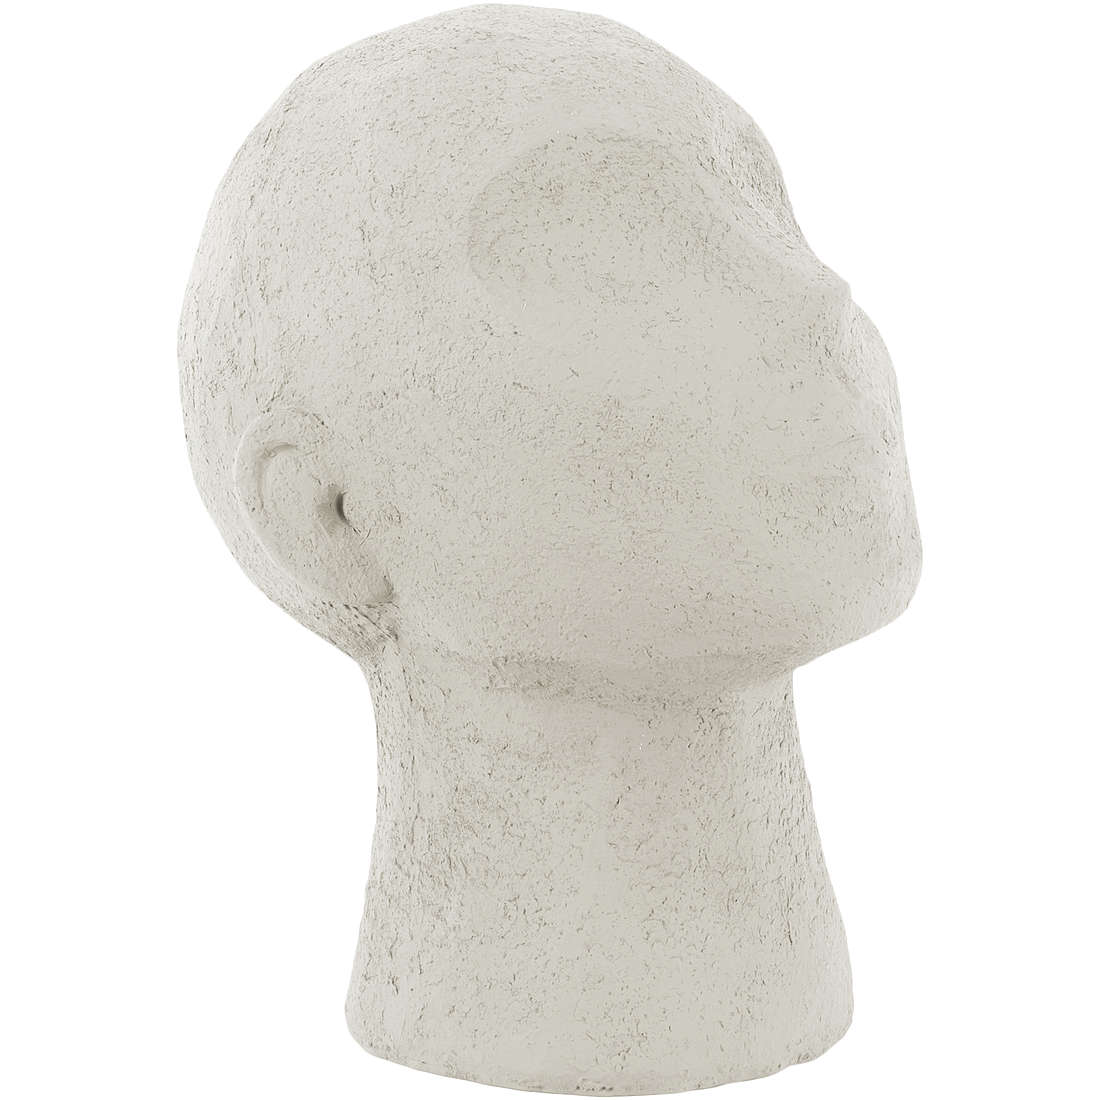 giftwares Present Time Statue Face Art PT3559WH